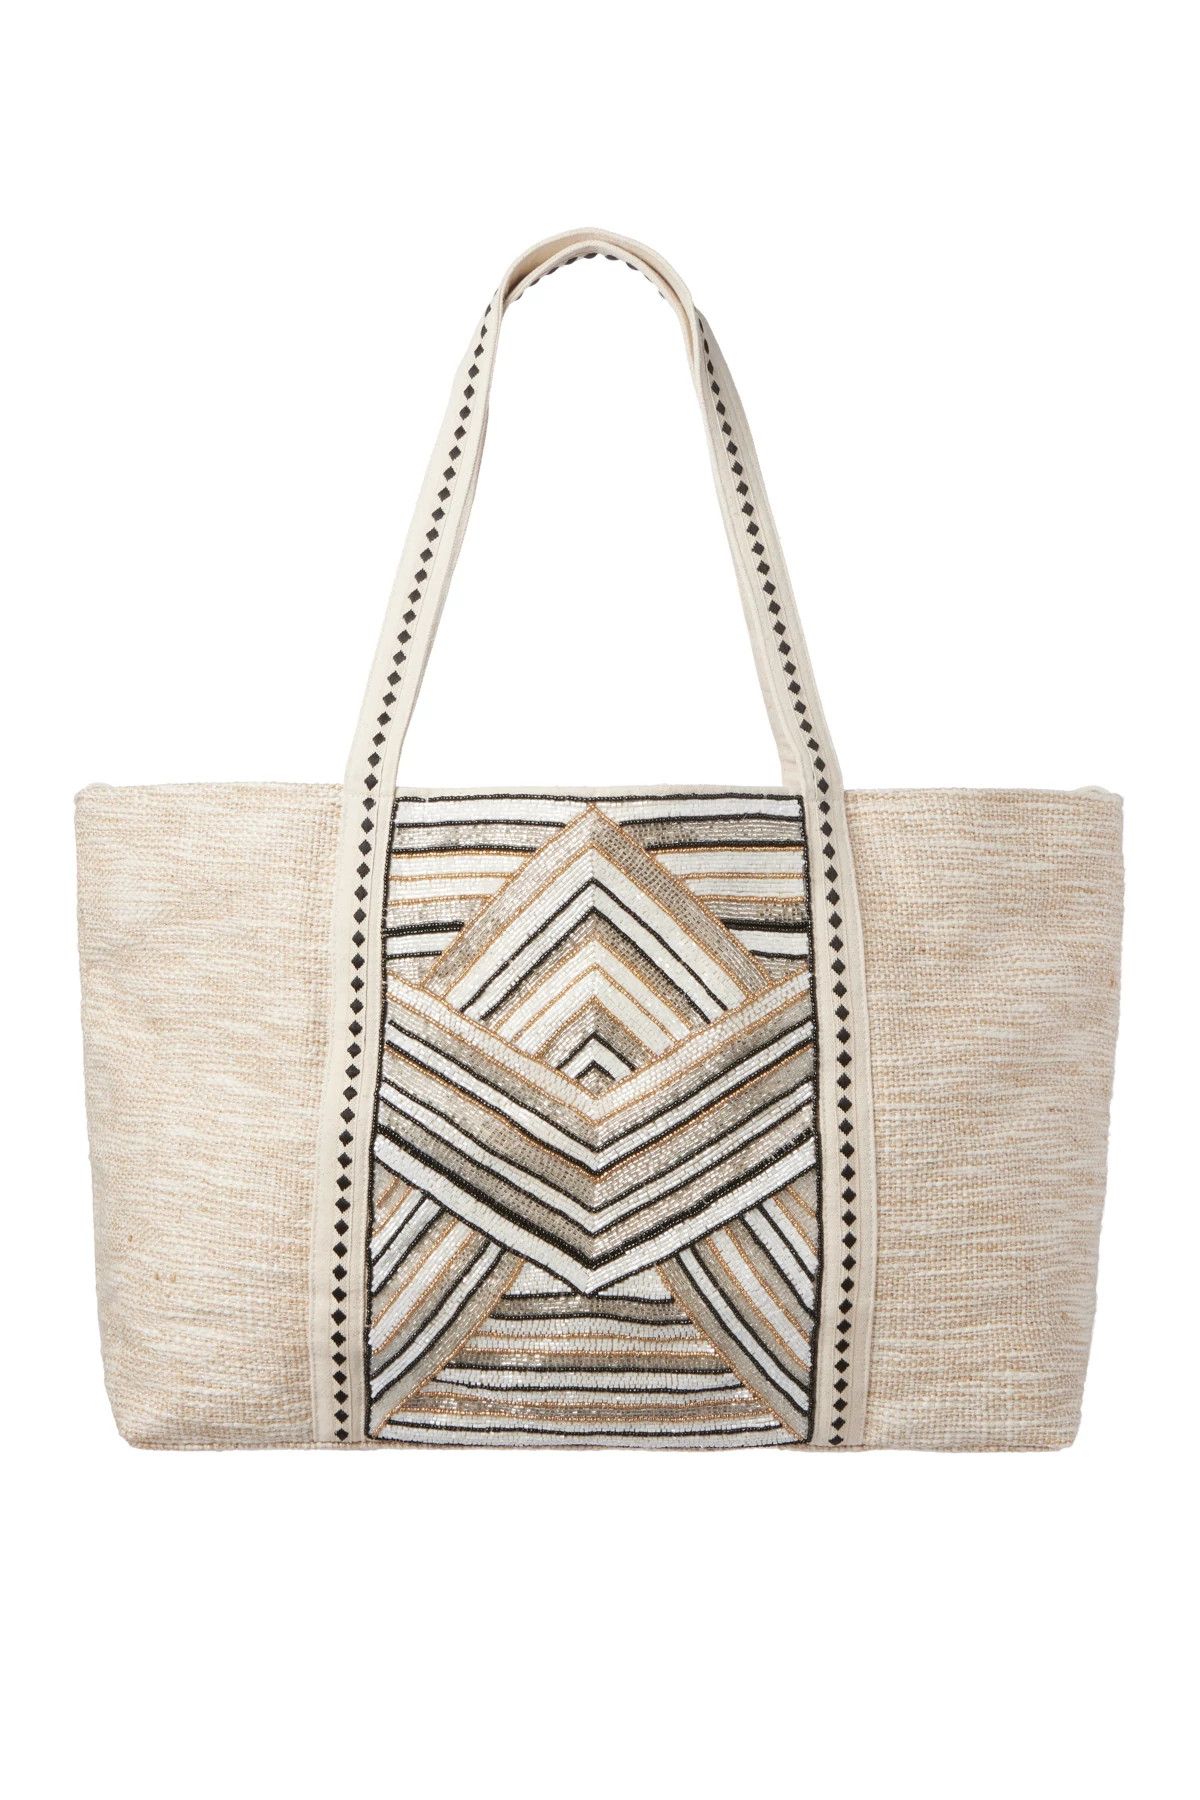 Beaded Tote | Everything But Water